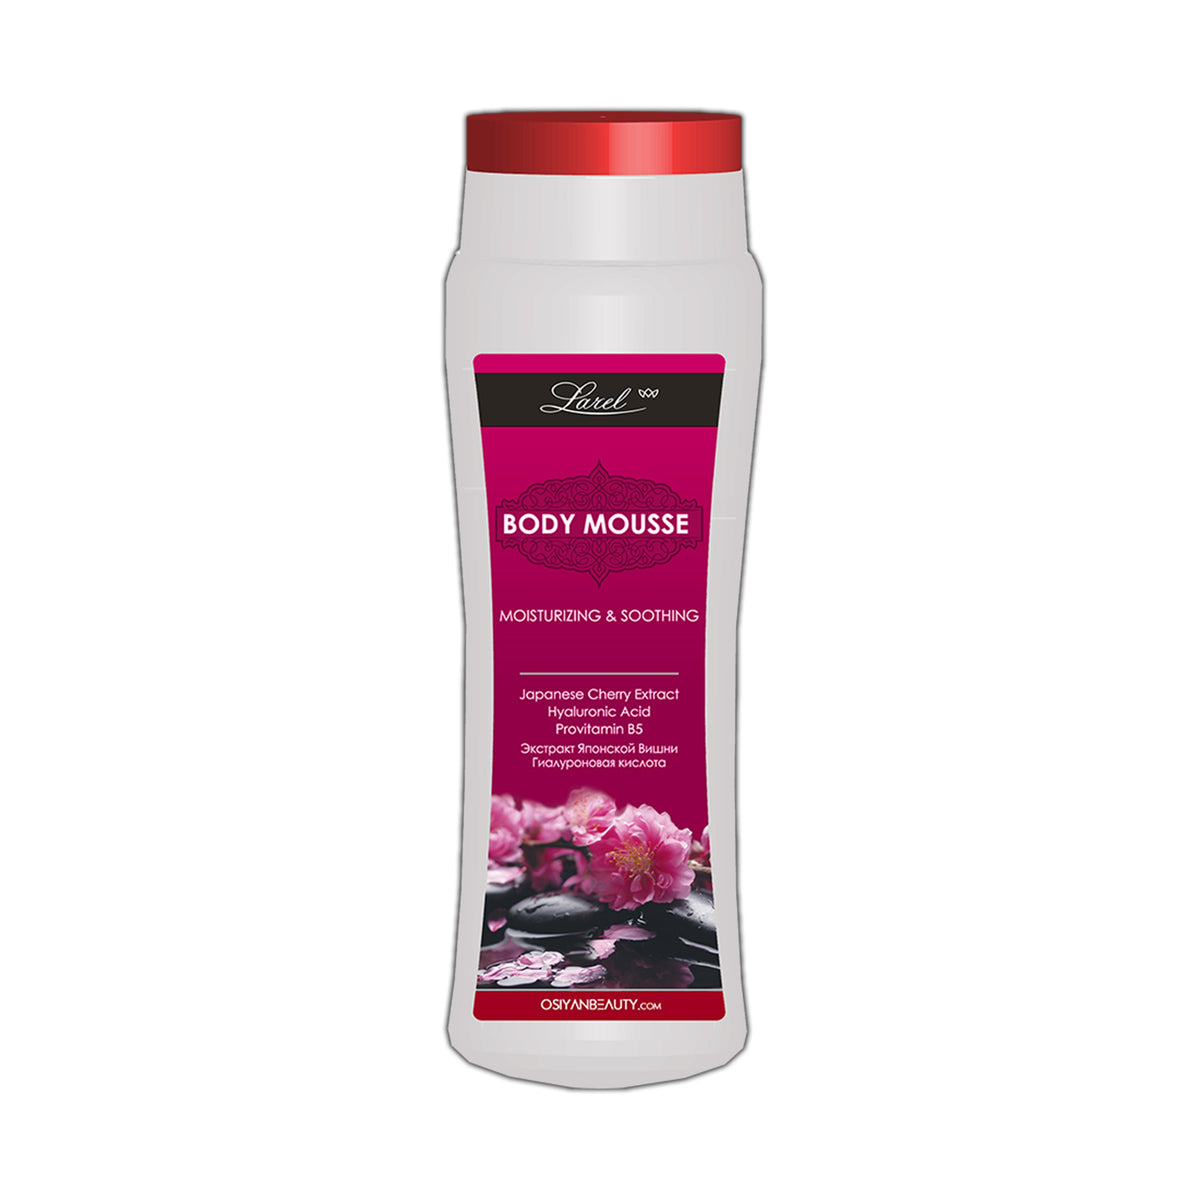 Body Mousse with Japanese Cherry Extract (made in Europe)